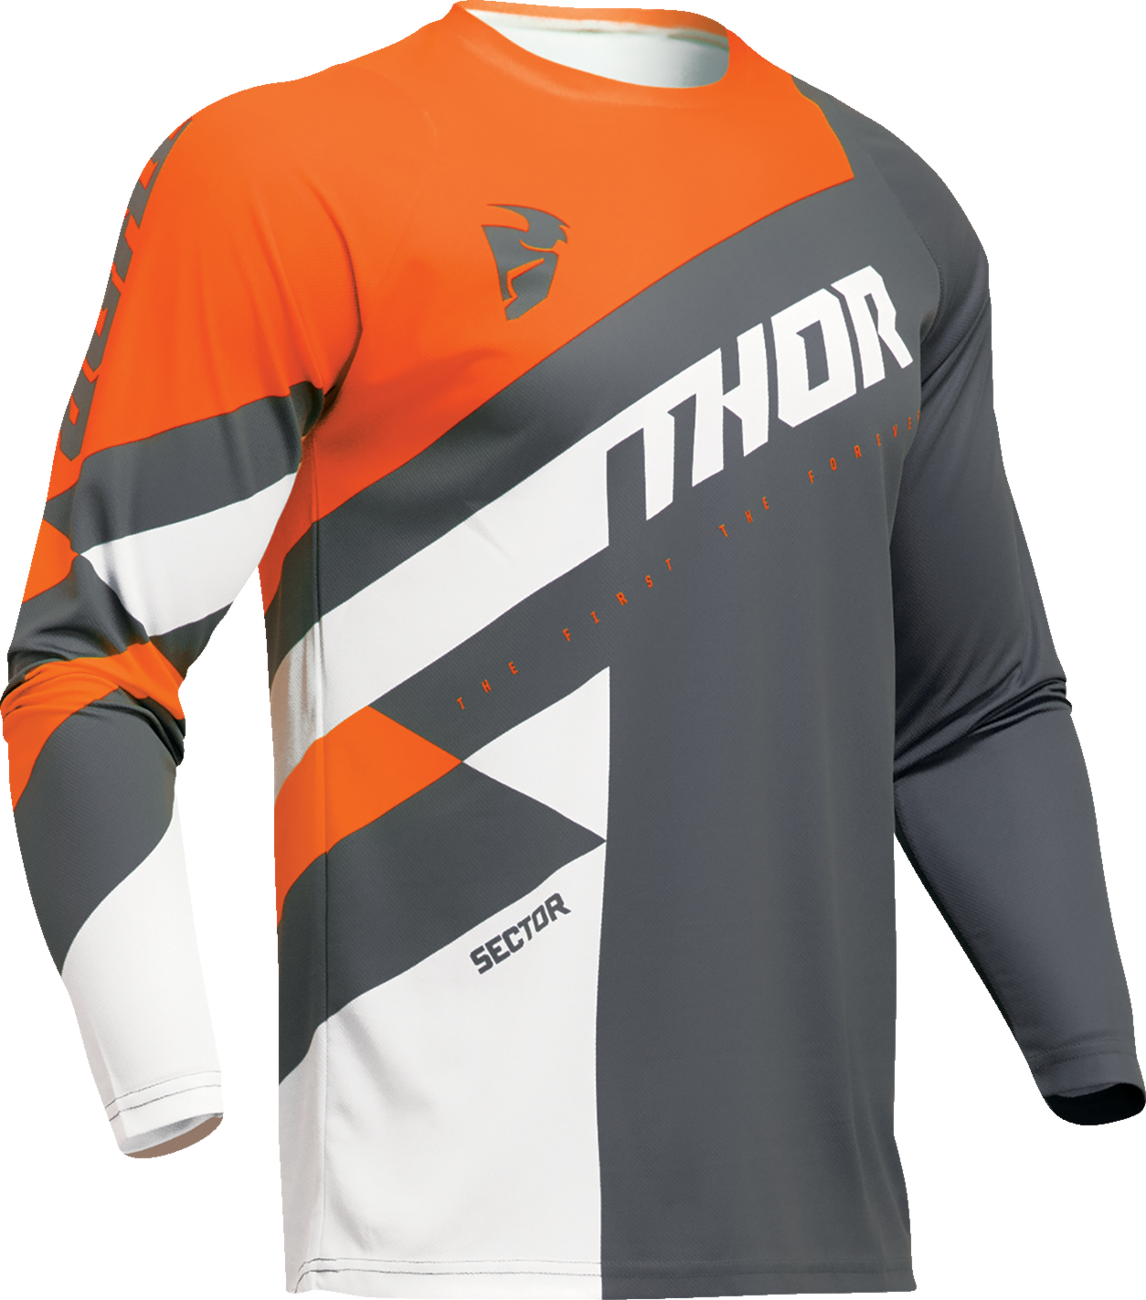 THOR Sector Checker Jersey - Charcoal/Orange - 2XL 2910-7591